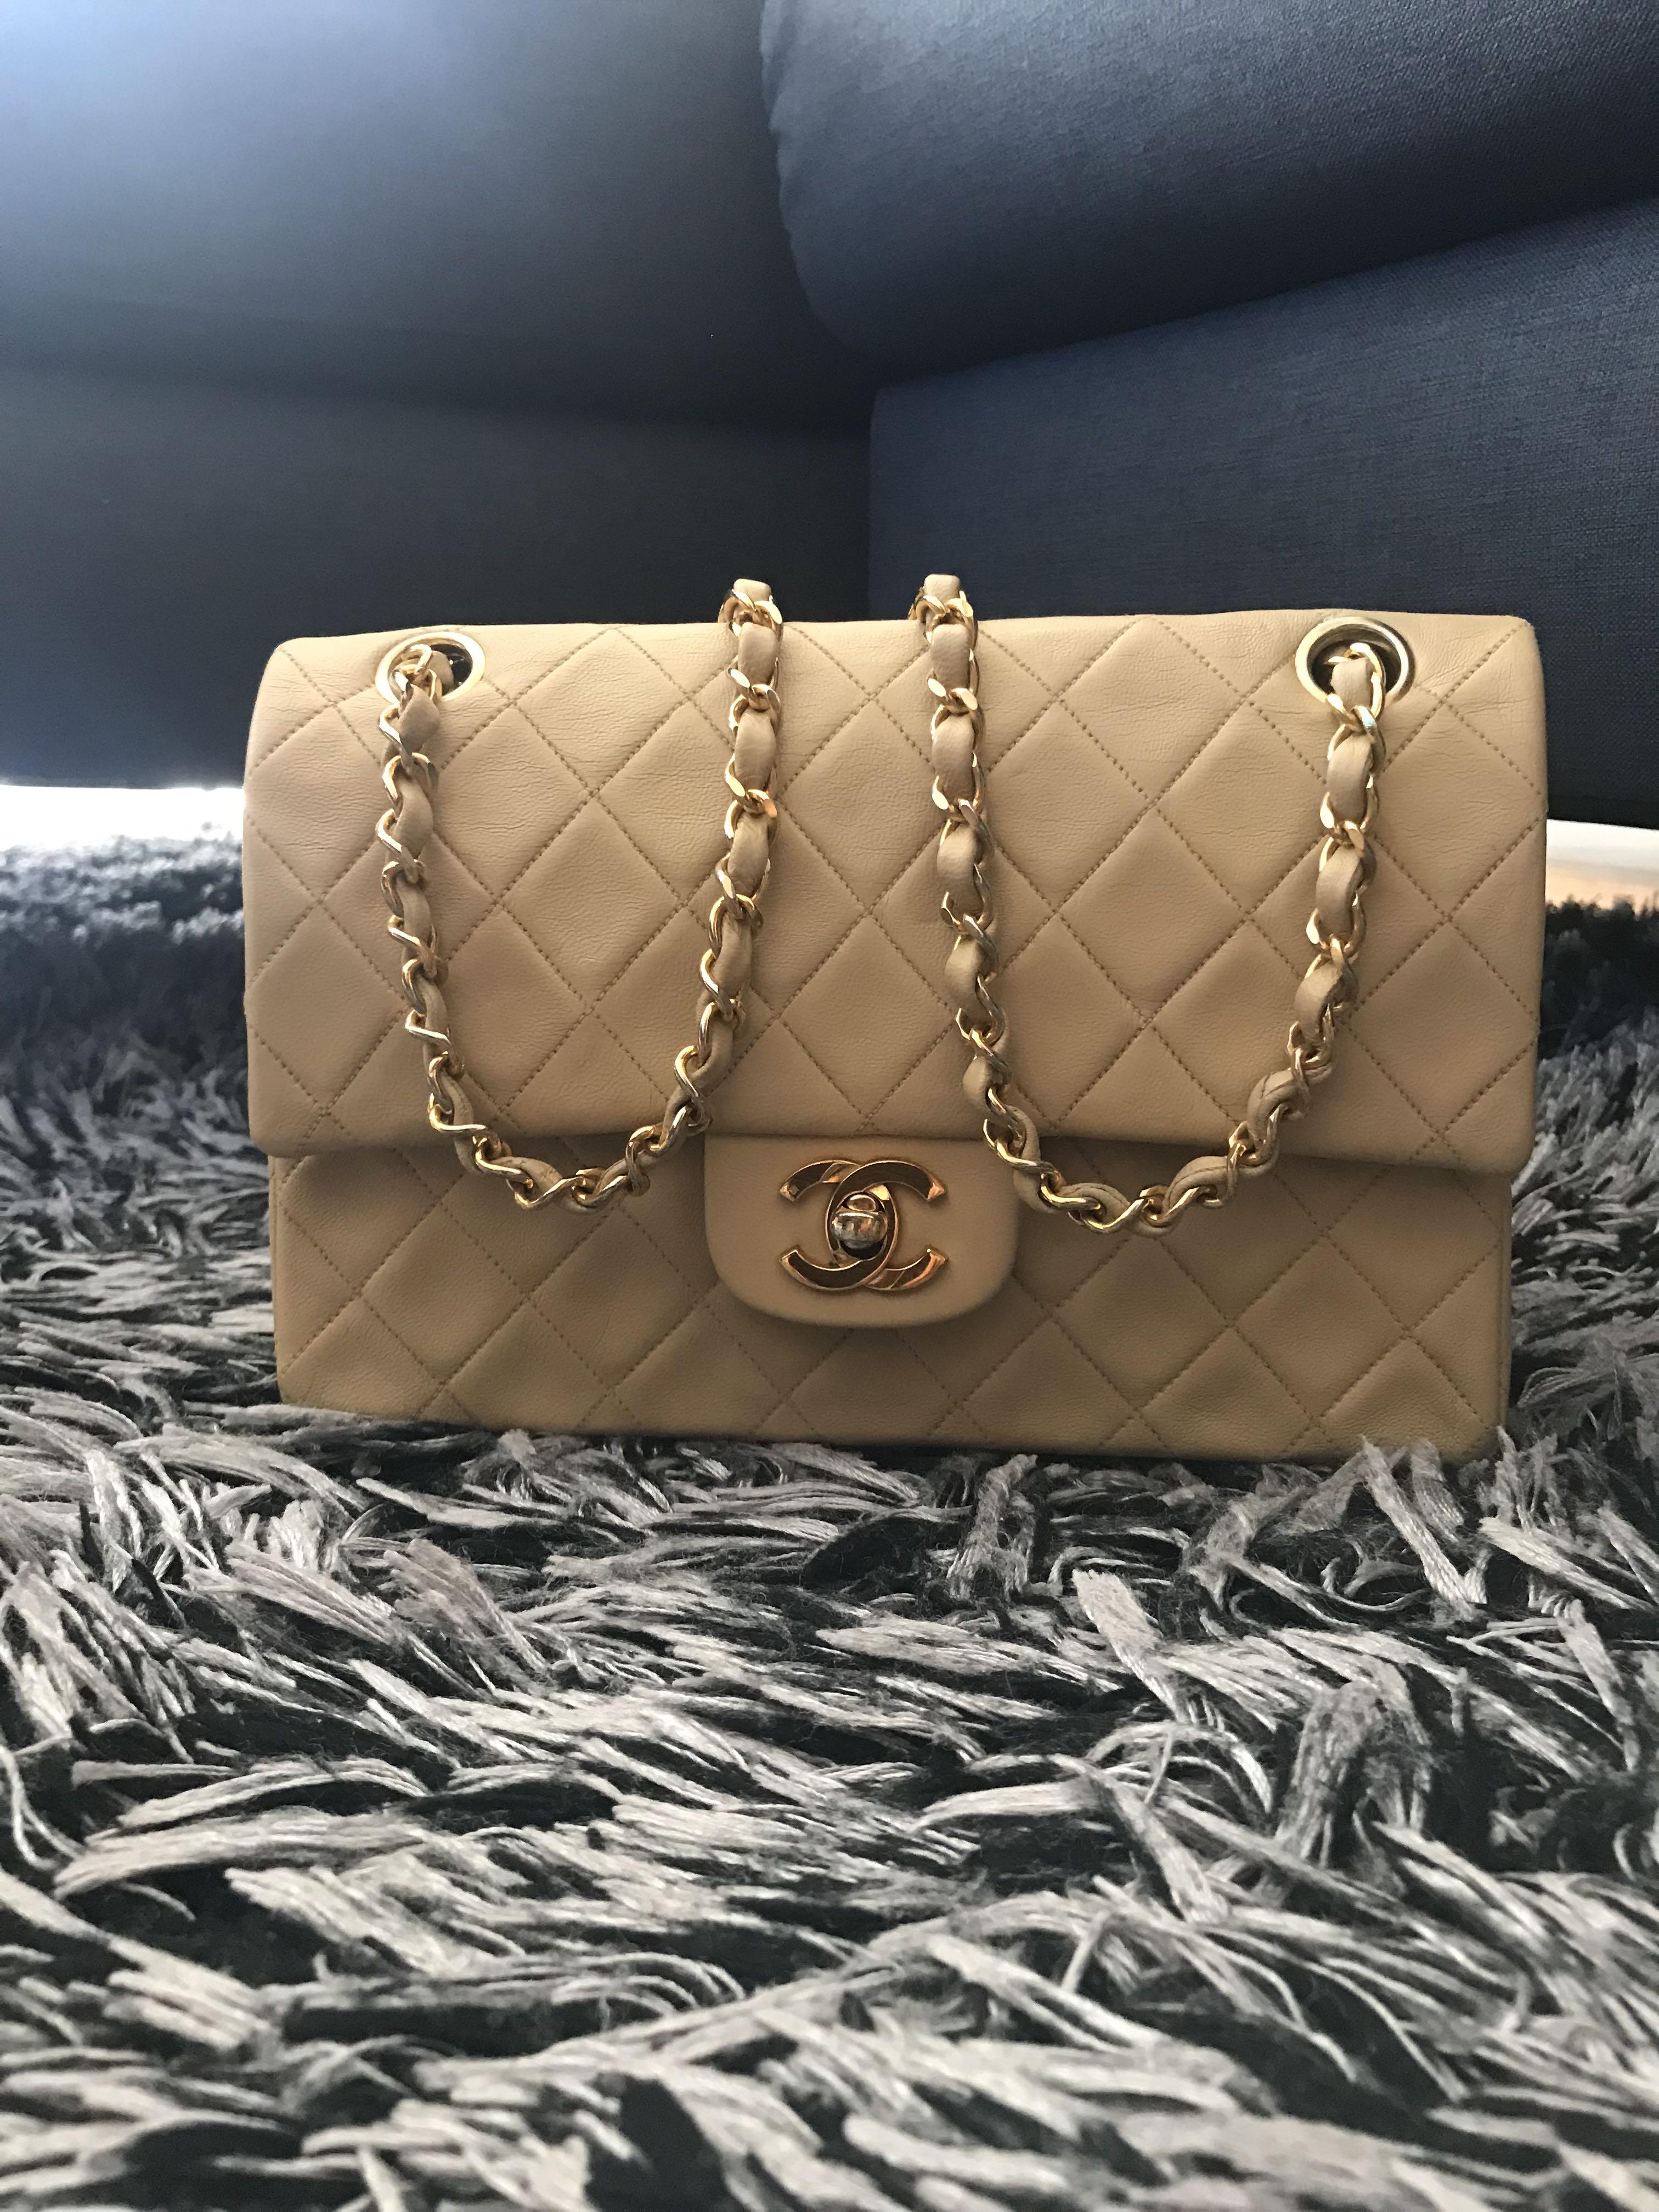 Chanel Small Classic Flap in Black Caviar SHW  Brands Lover